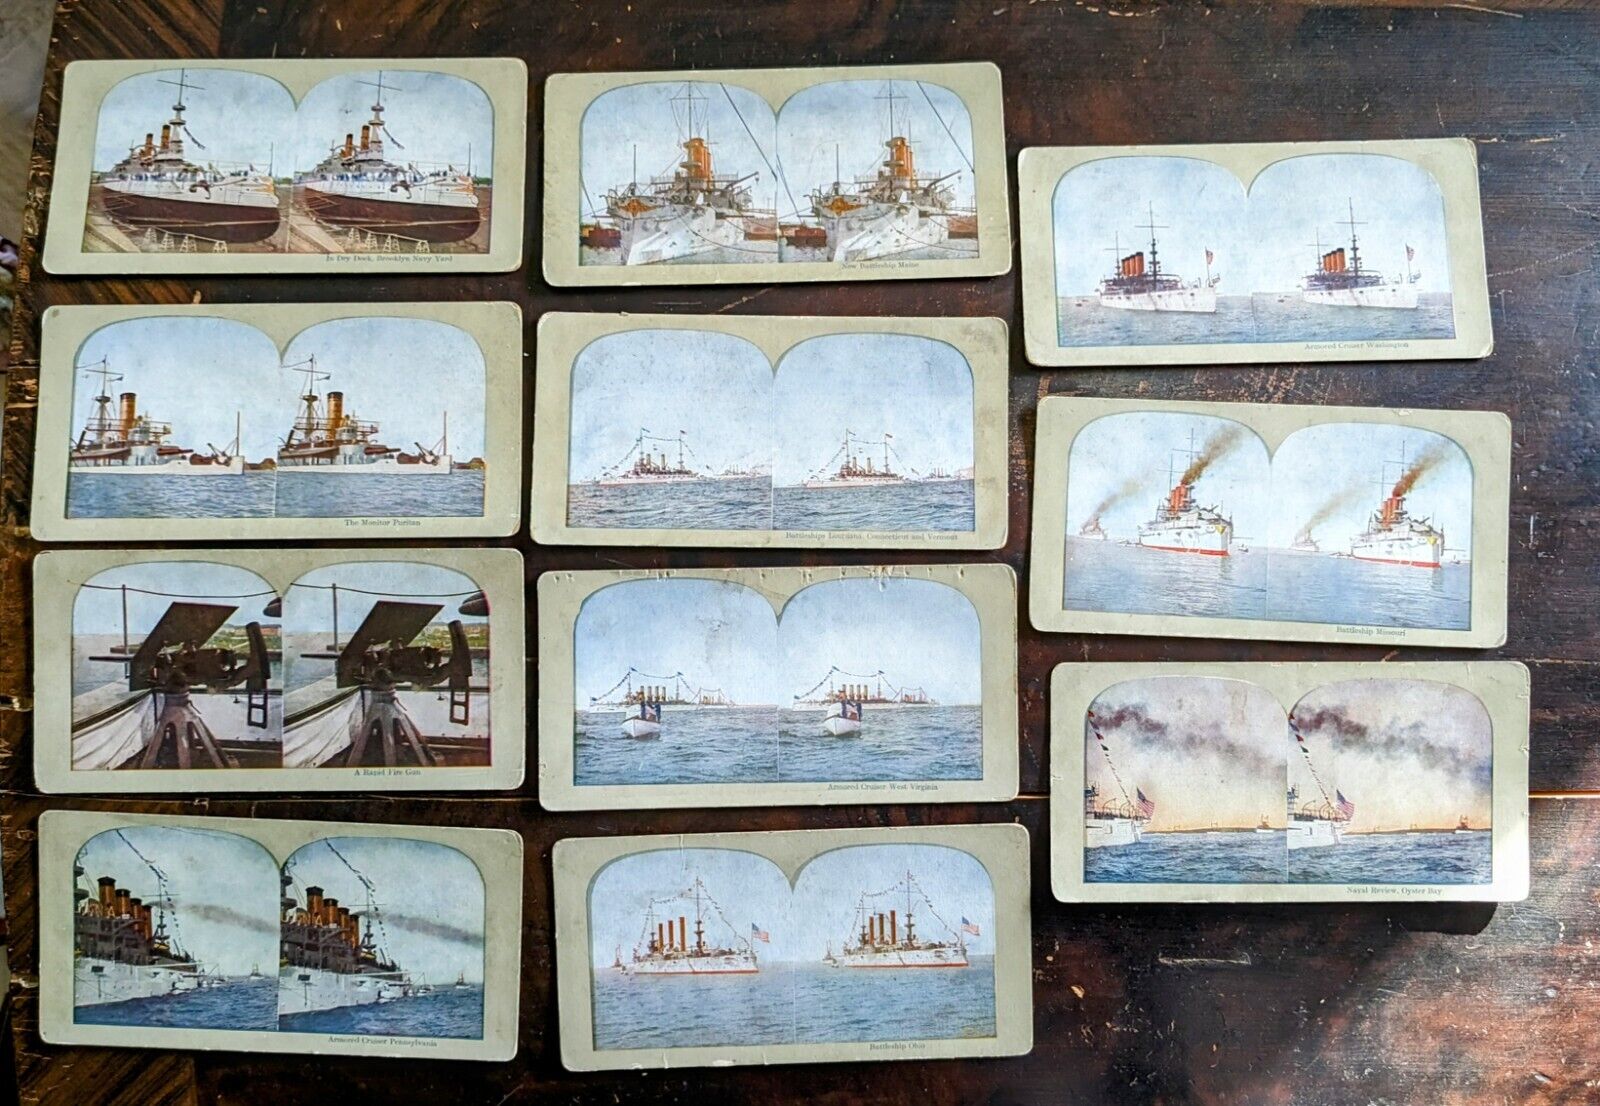 Lot of 11 Antique StereoScope Photo Cards Military Navy Pre WWI Era, About 1907